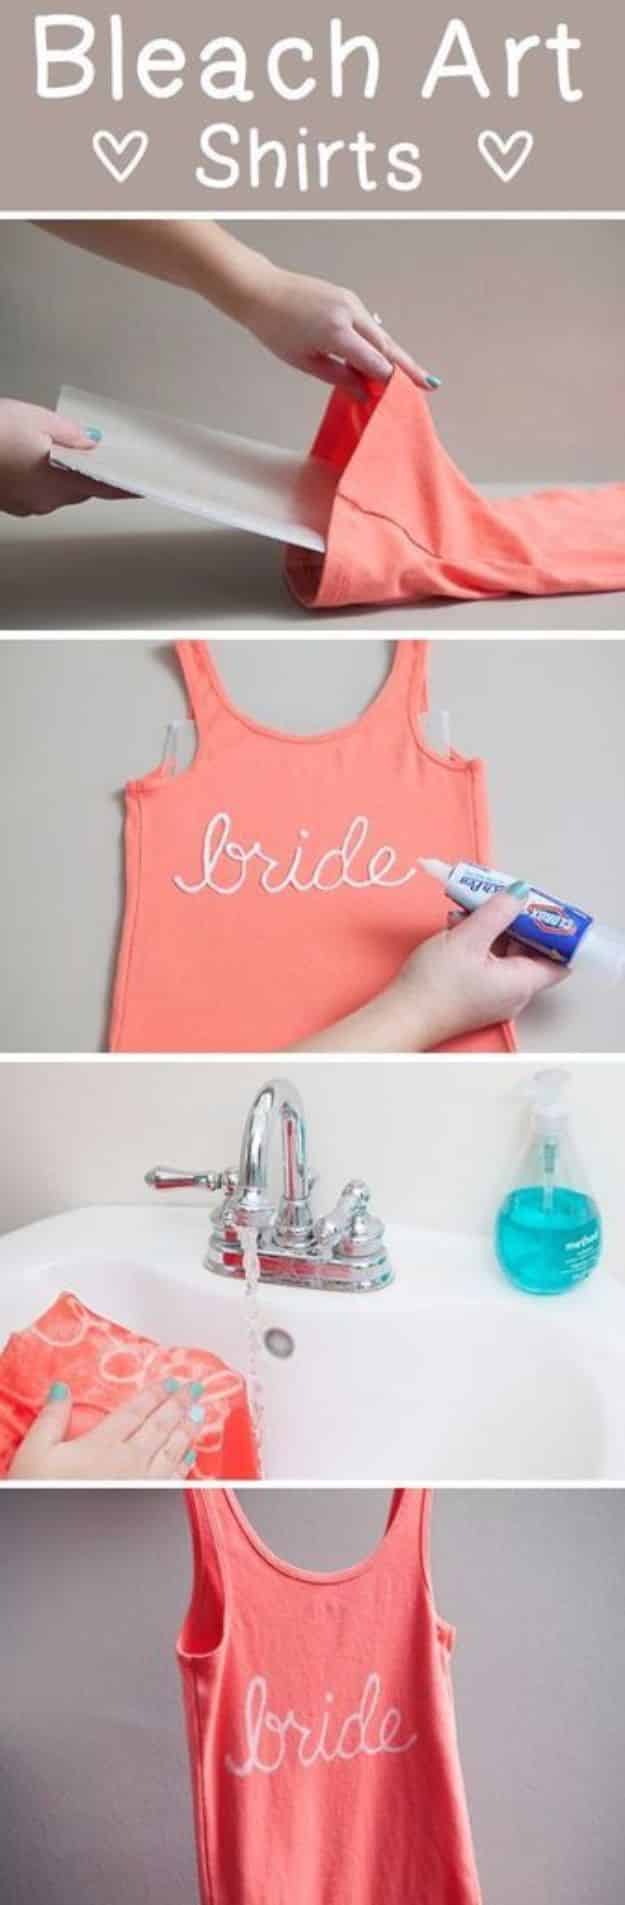 Cheap Wedding Gift Ideas - DIY Bleached Bride T-Shirt - DIY Wedding Gifts You Can Make On A Budget - Quick and Easy Ideas for Handmade Presents for the Couple Getting Married - Inexpensive Things To Make for Bride and Groom - DIY Home Decor, Wall Art, Glassware, Furniture, Tableware, Place Settings, Cake and Cookie Plates and Glasses #diyweddings #weddinggifts